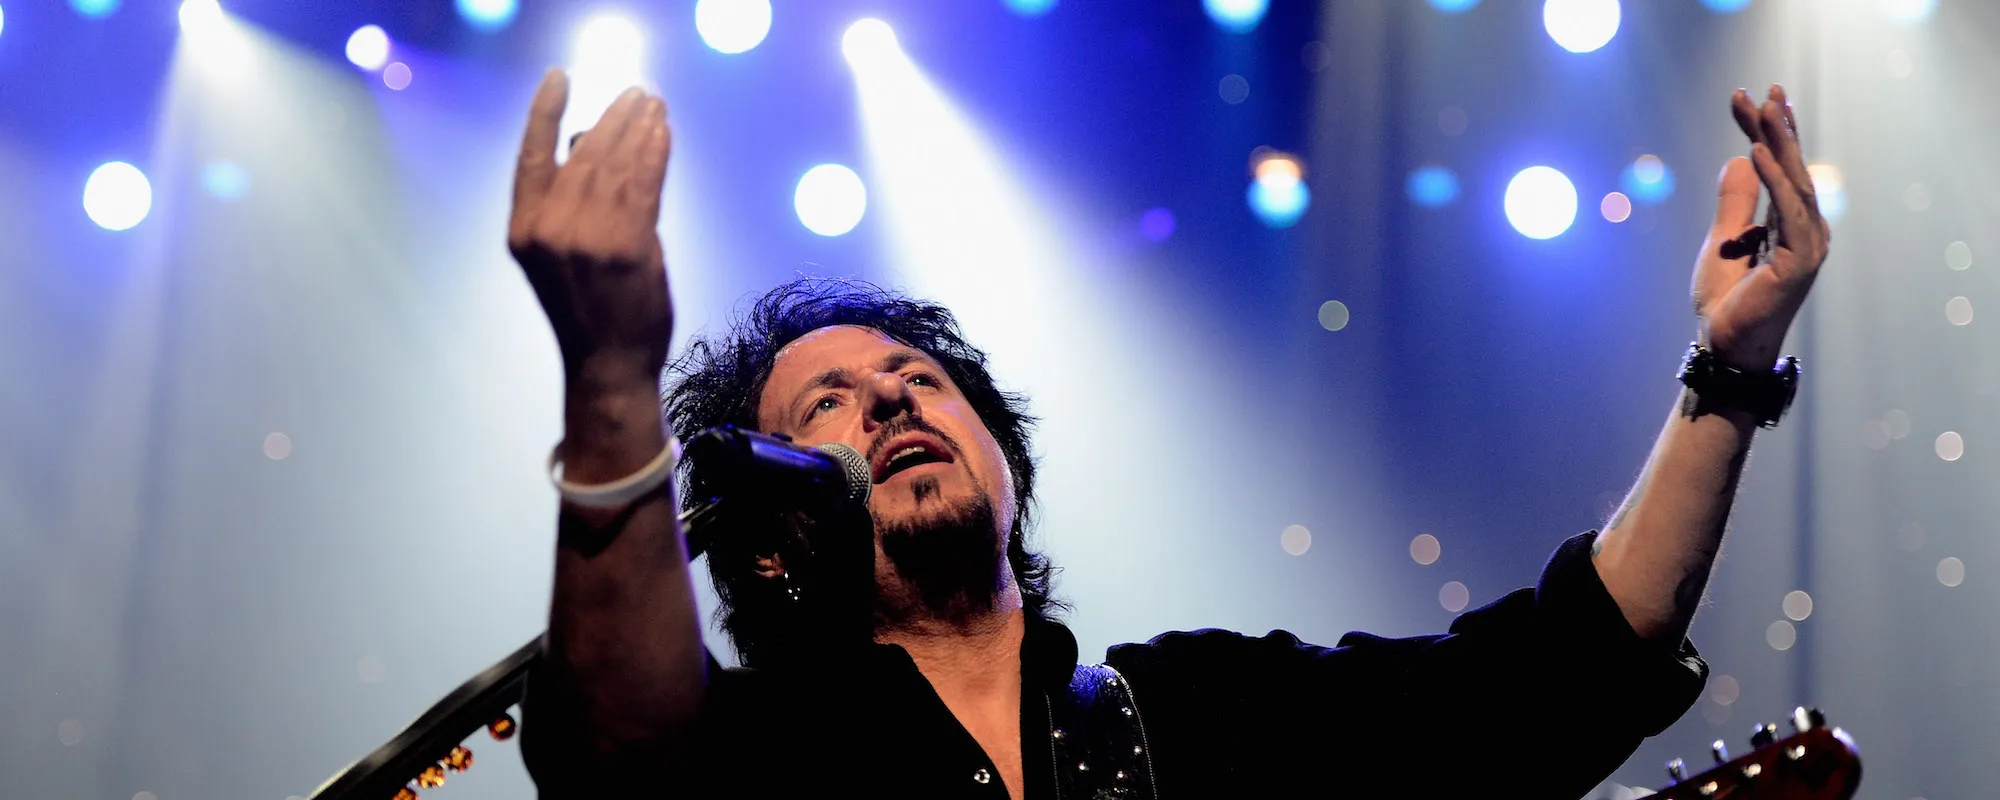 Why Steve Lukather Still Has a Love-Hate Relationship with Toto Mega Hit “Africa”